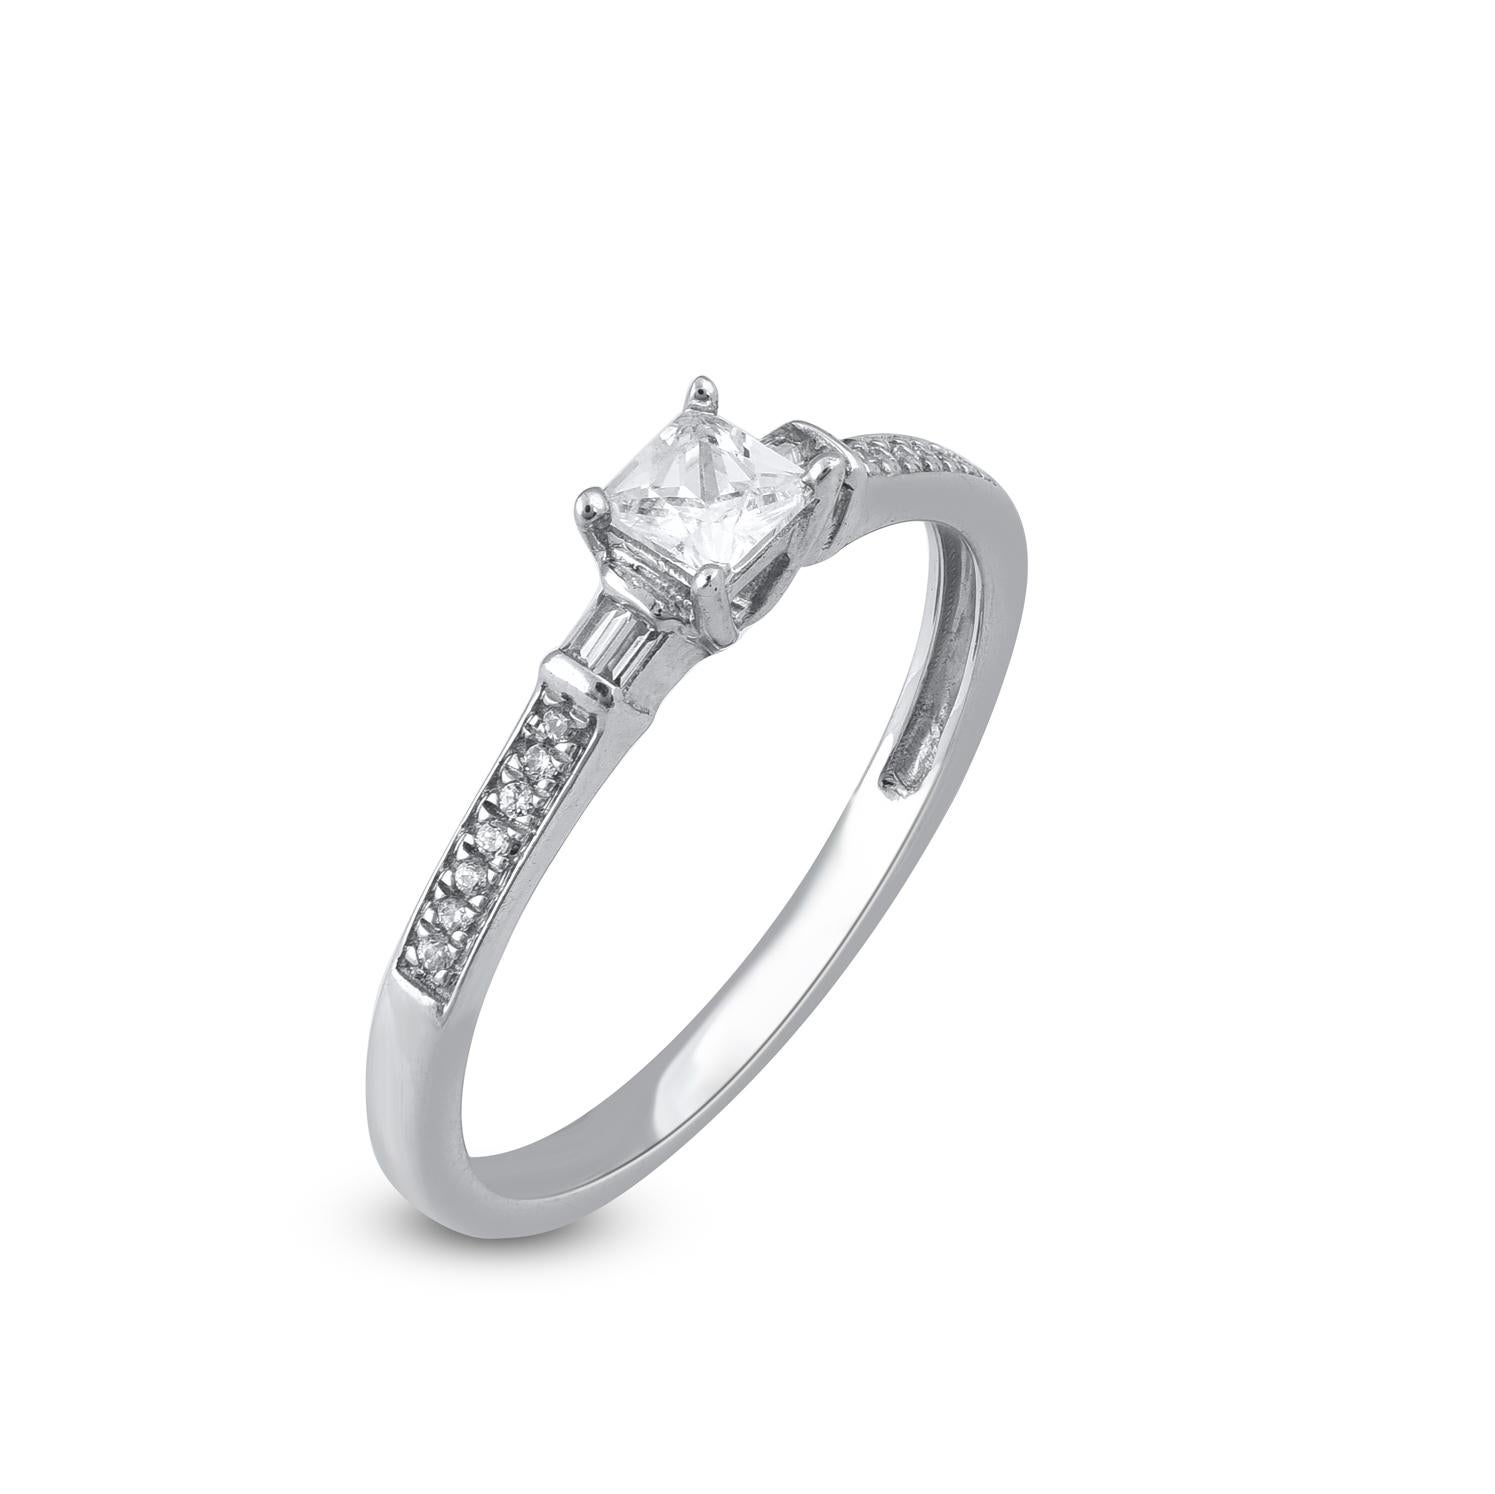 Simply stunning engagement ring features 0.26 ct princess cut center stone and 0.07 ct of 14 round and 4 baguette diamond frame and shank lined diamonds. This ring is handcrafted in 14 karat white gold diamond set in prong, pave and channel setting.